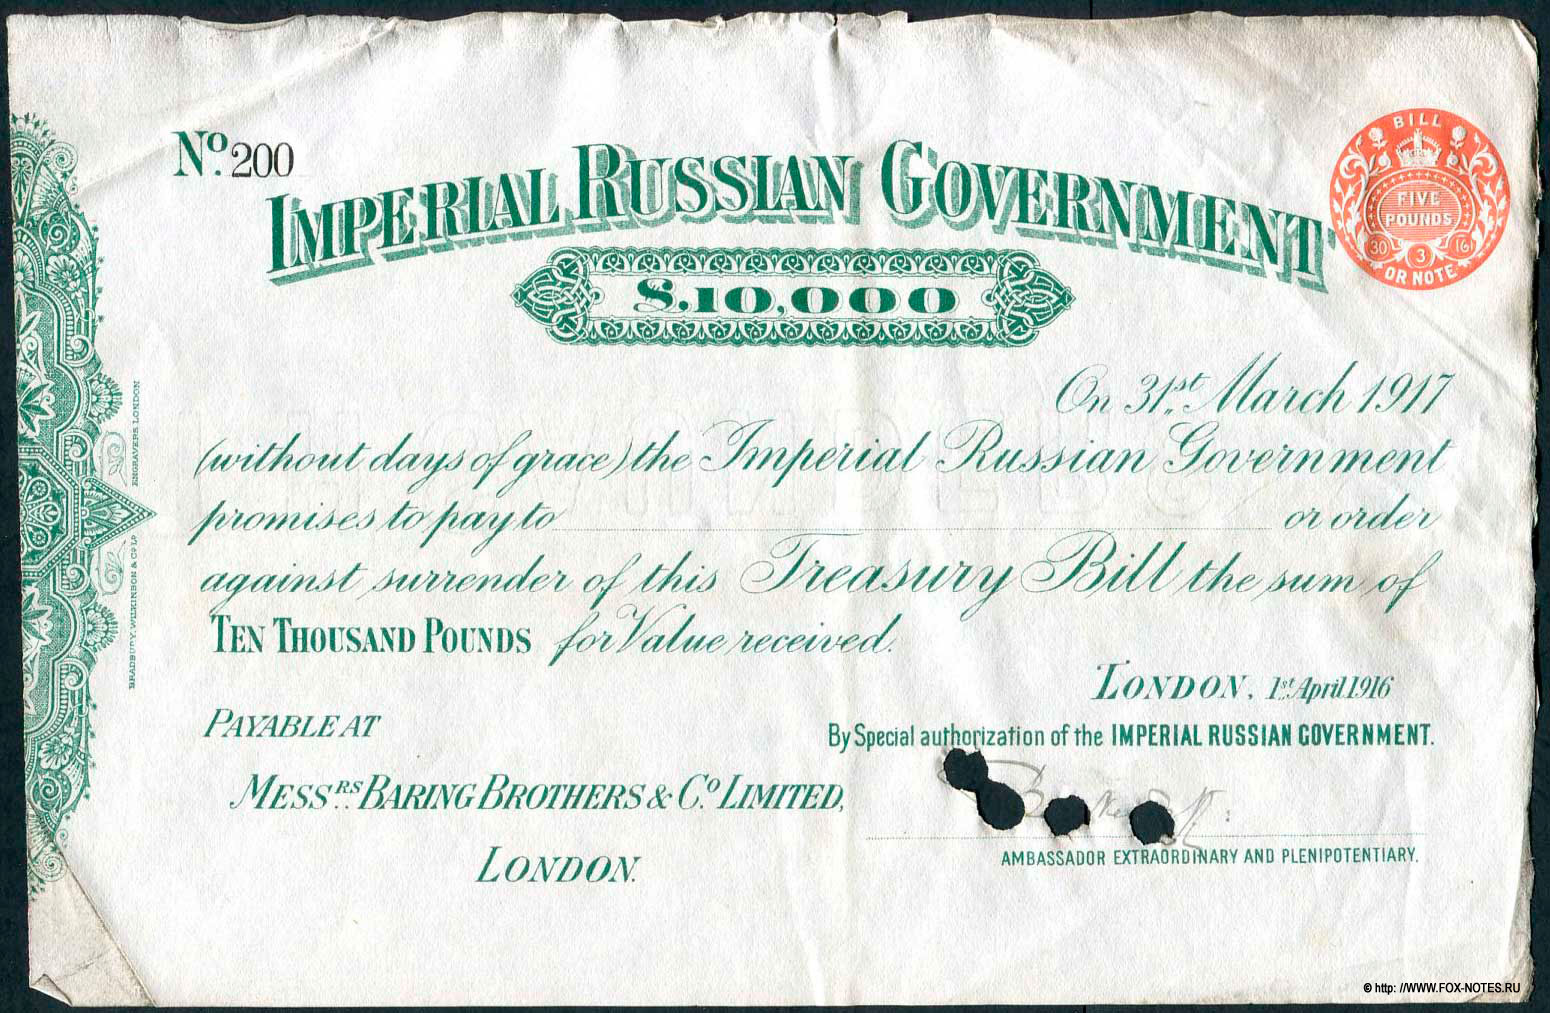 Imperial Russian Government 10000 Pounds 1st April 1916. - 31st March 1917.